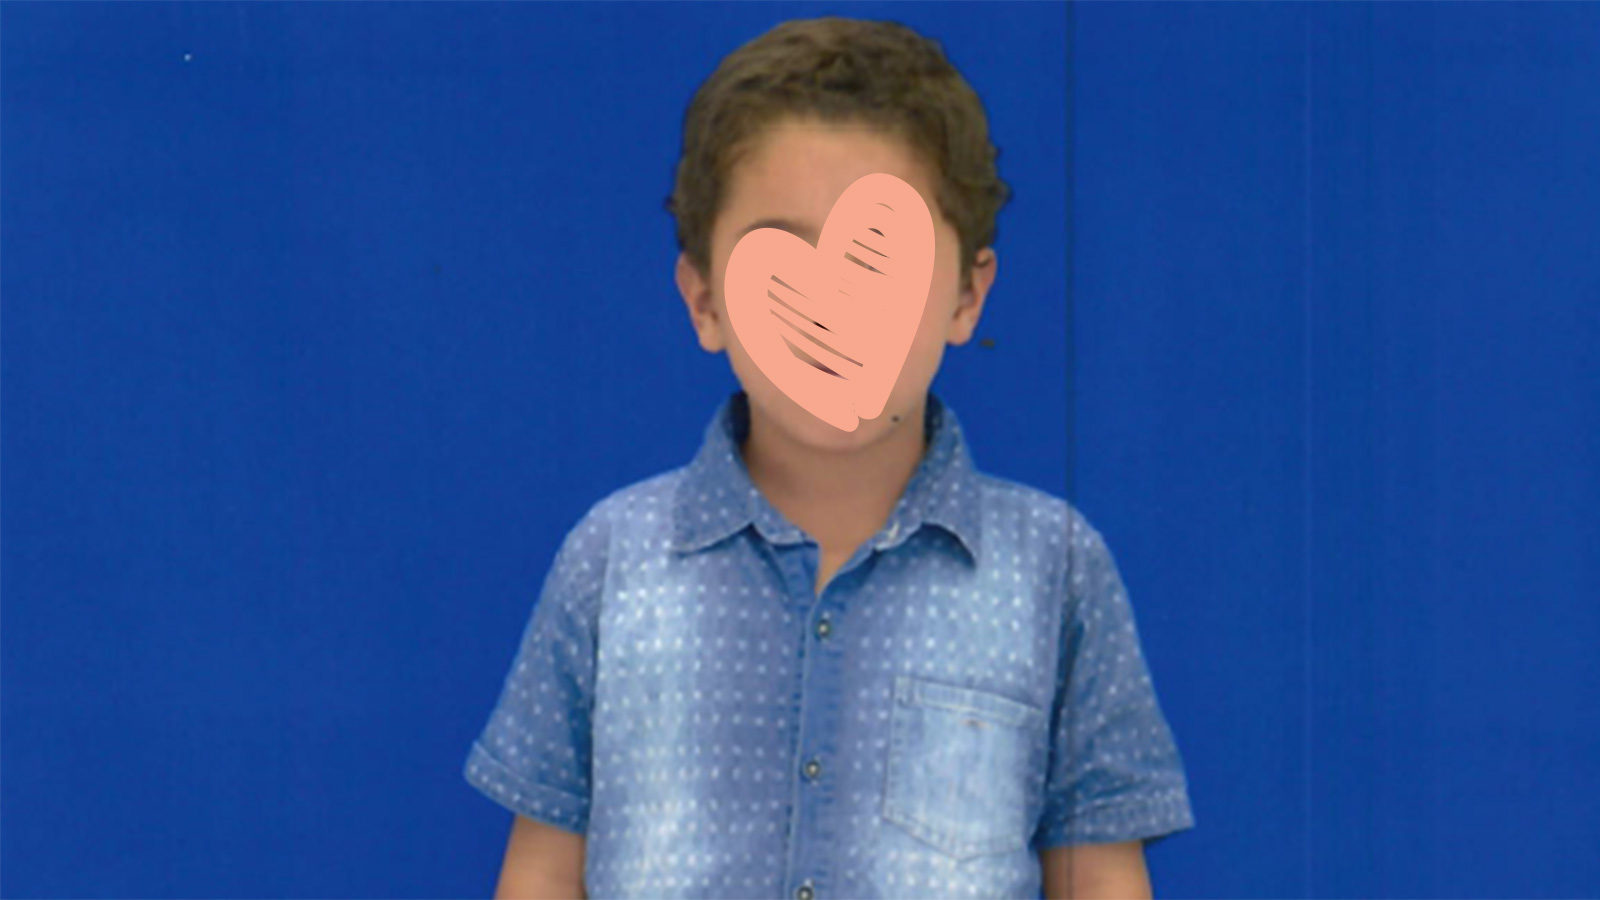 yvon needs an adoptive family standing in front of blue background with heart over face